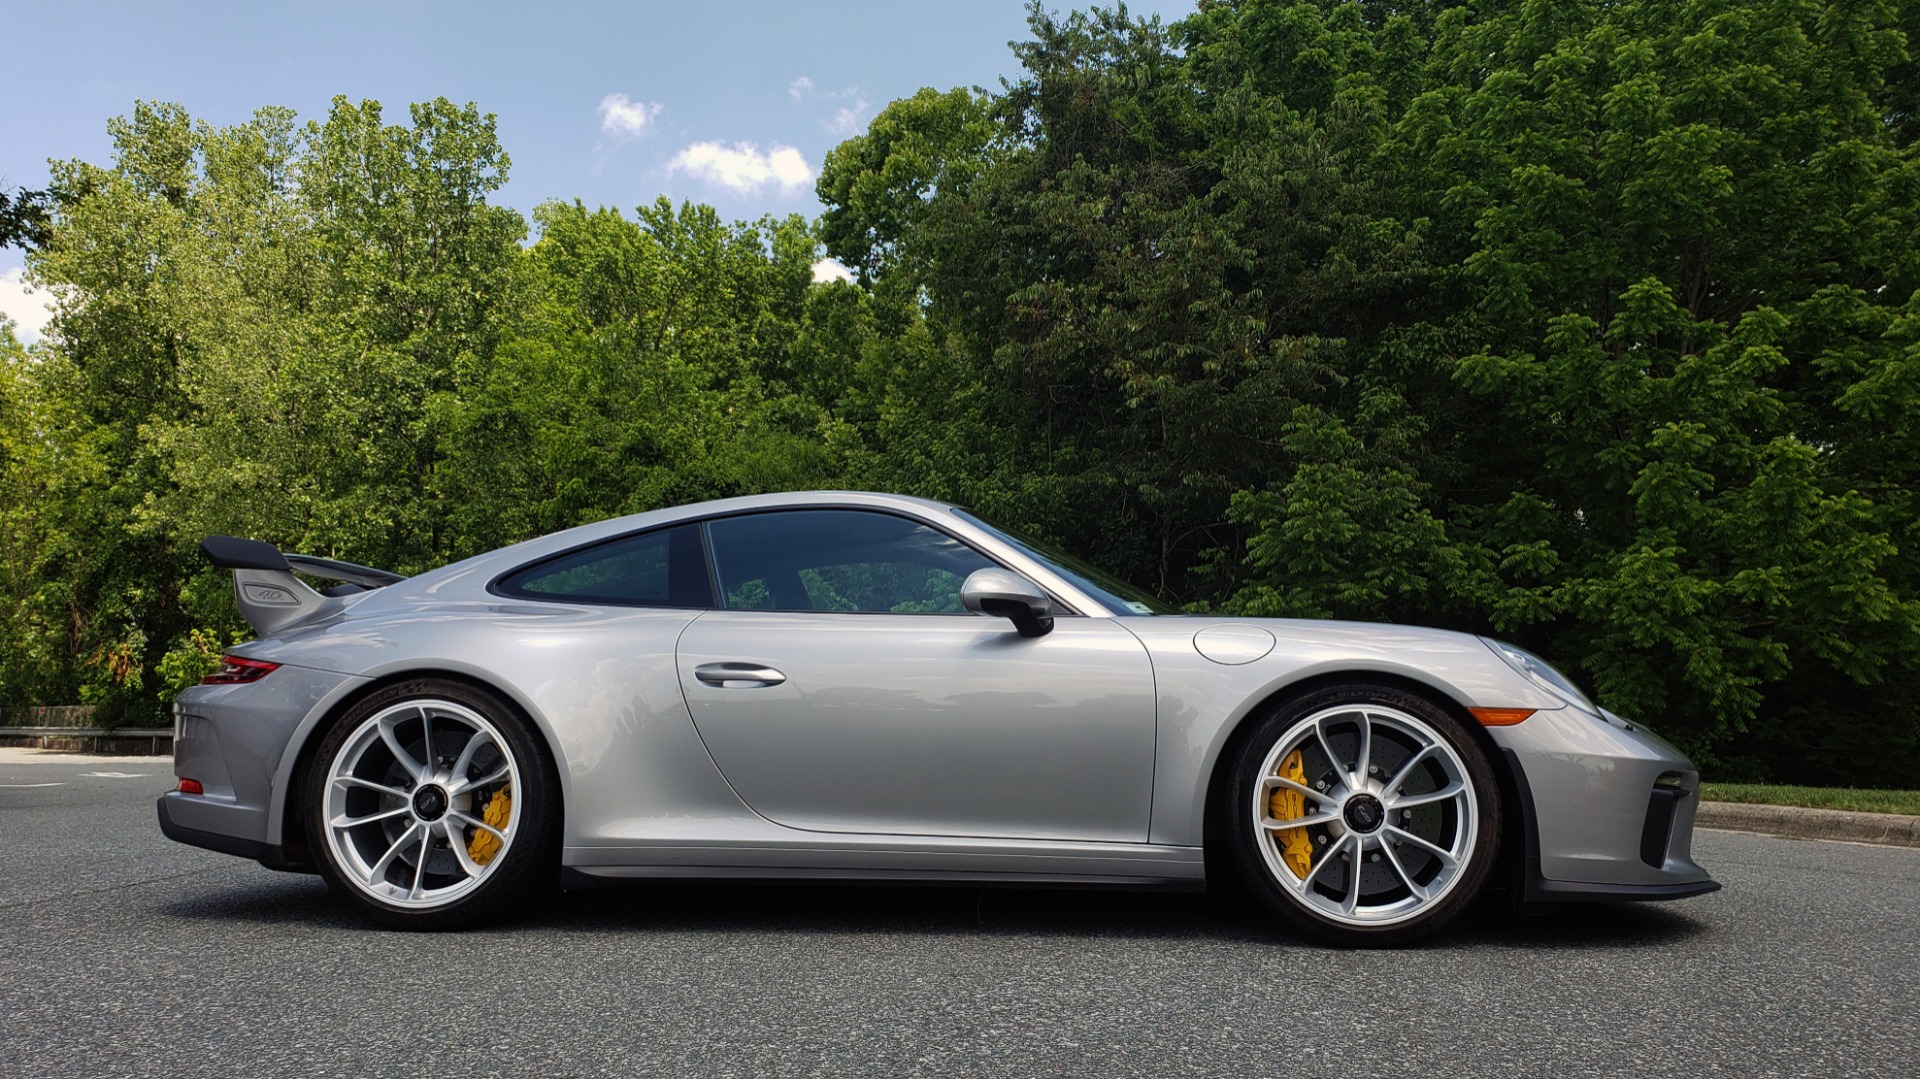 Used 2018 Porsche 911 GT3 4.0L 500HP / 6-SPD MNL / NAV / REARVIEW / PCCB for sale Sold at Formula Imports in Charlotte NC 28227 5